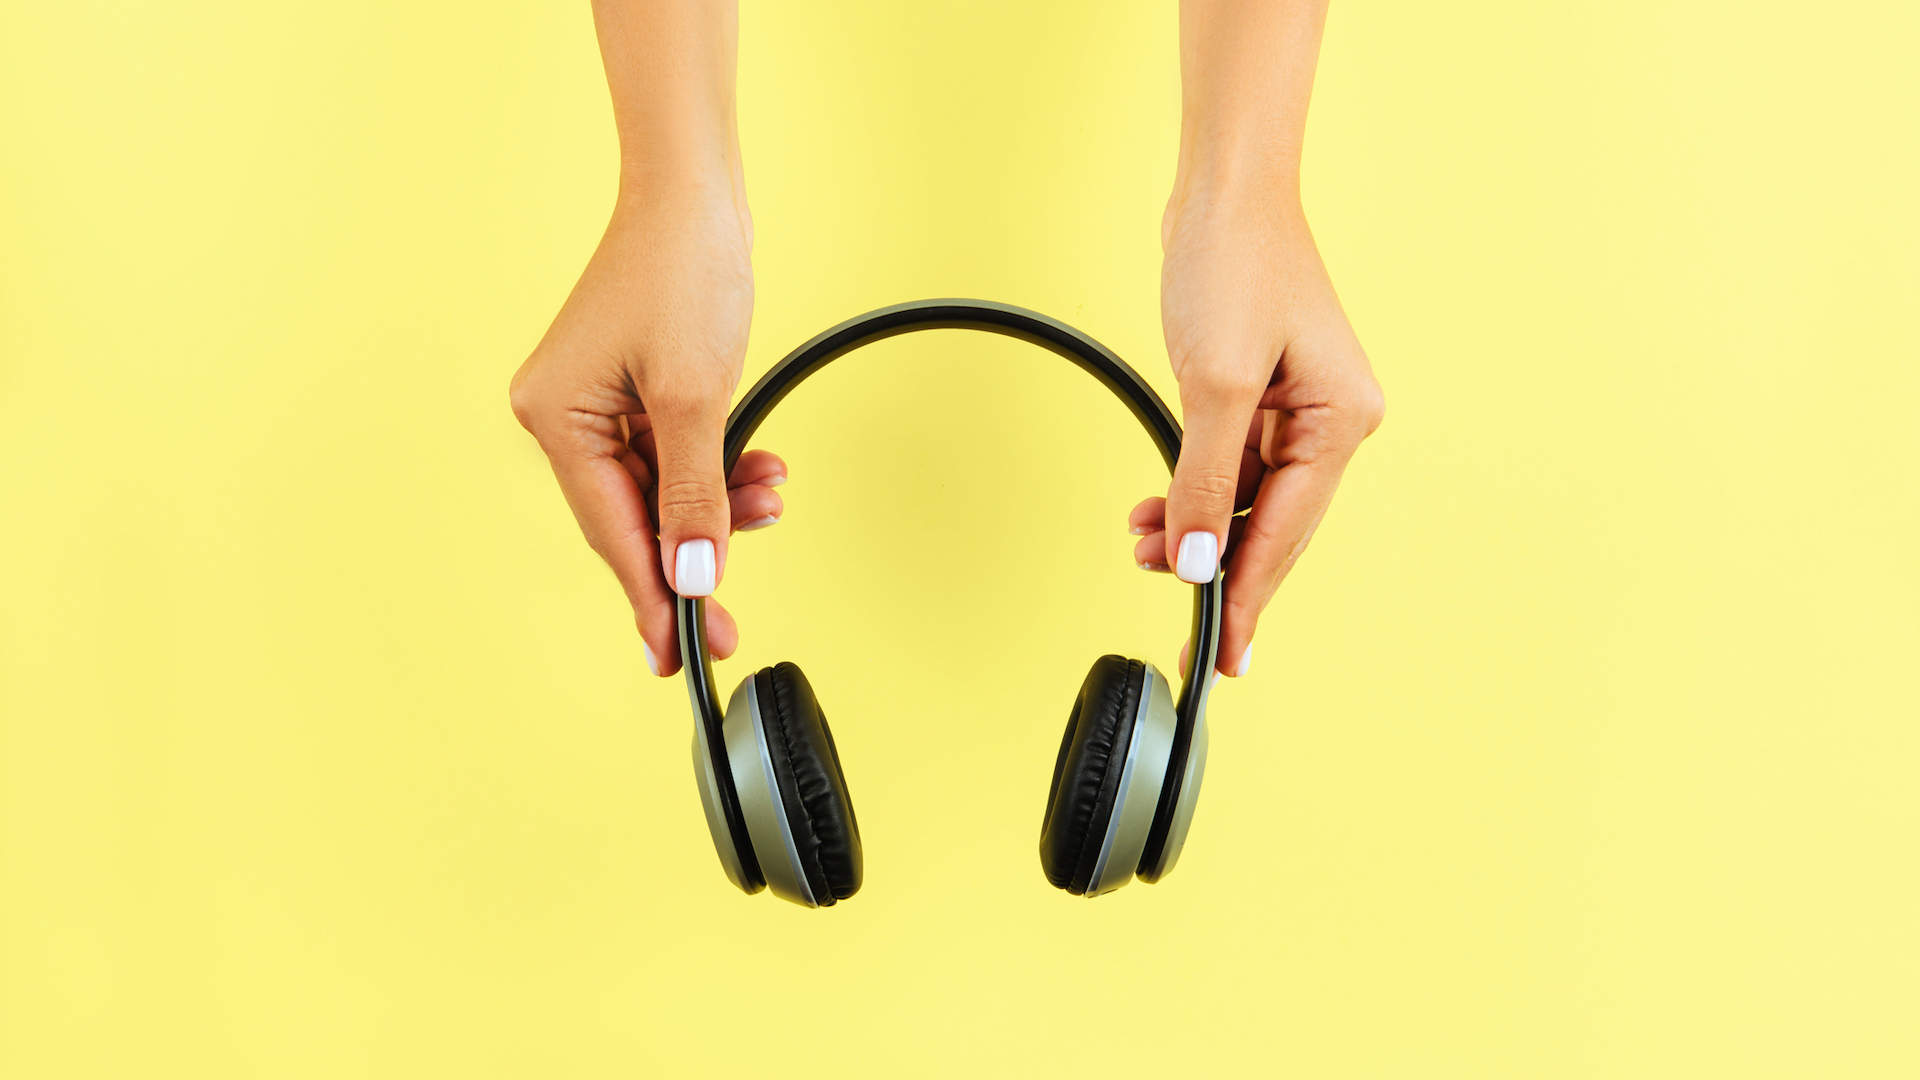 A pair of hands hold some wireless headphones